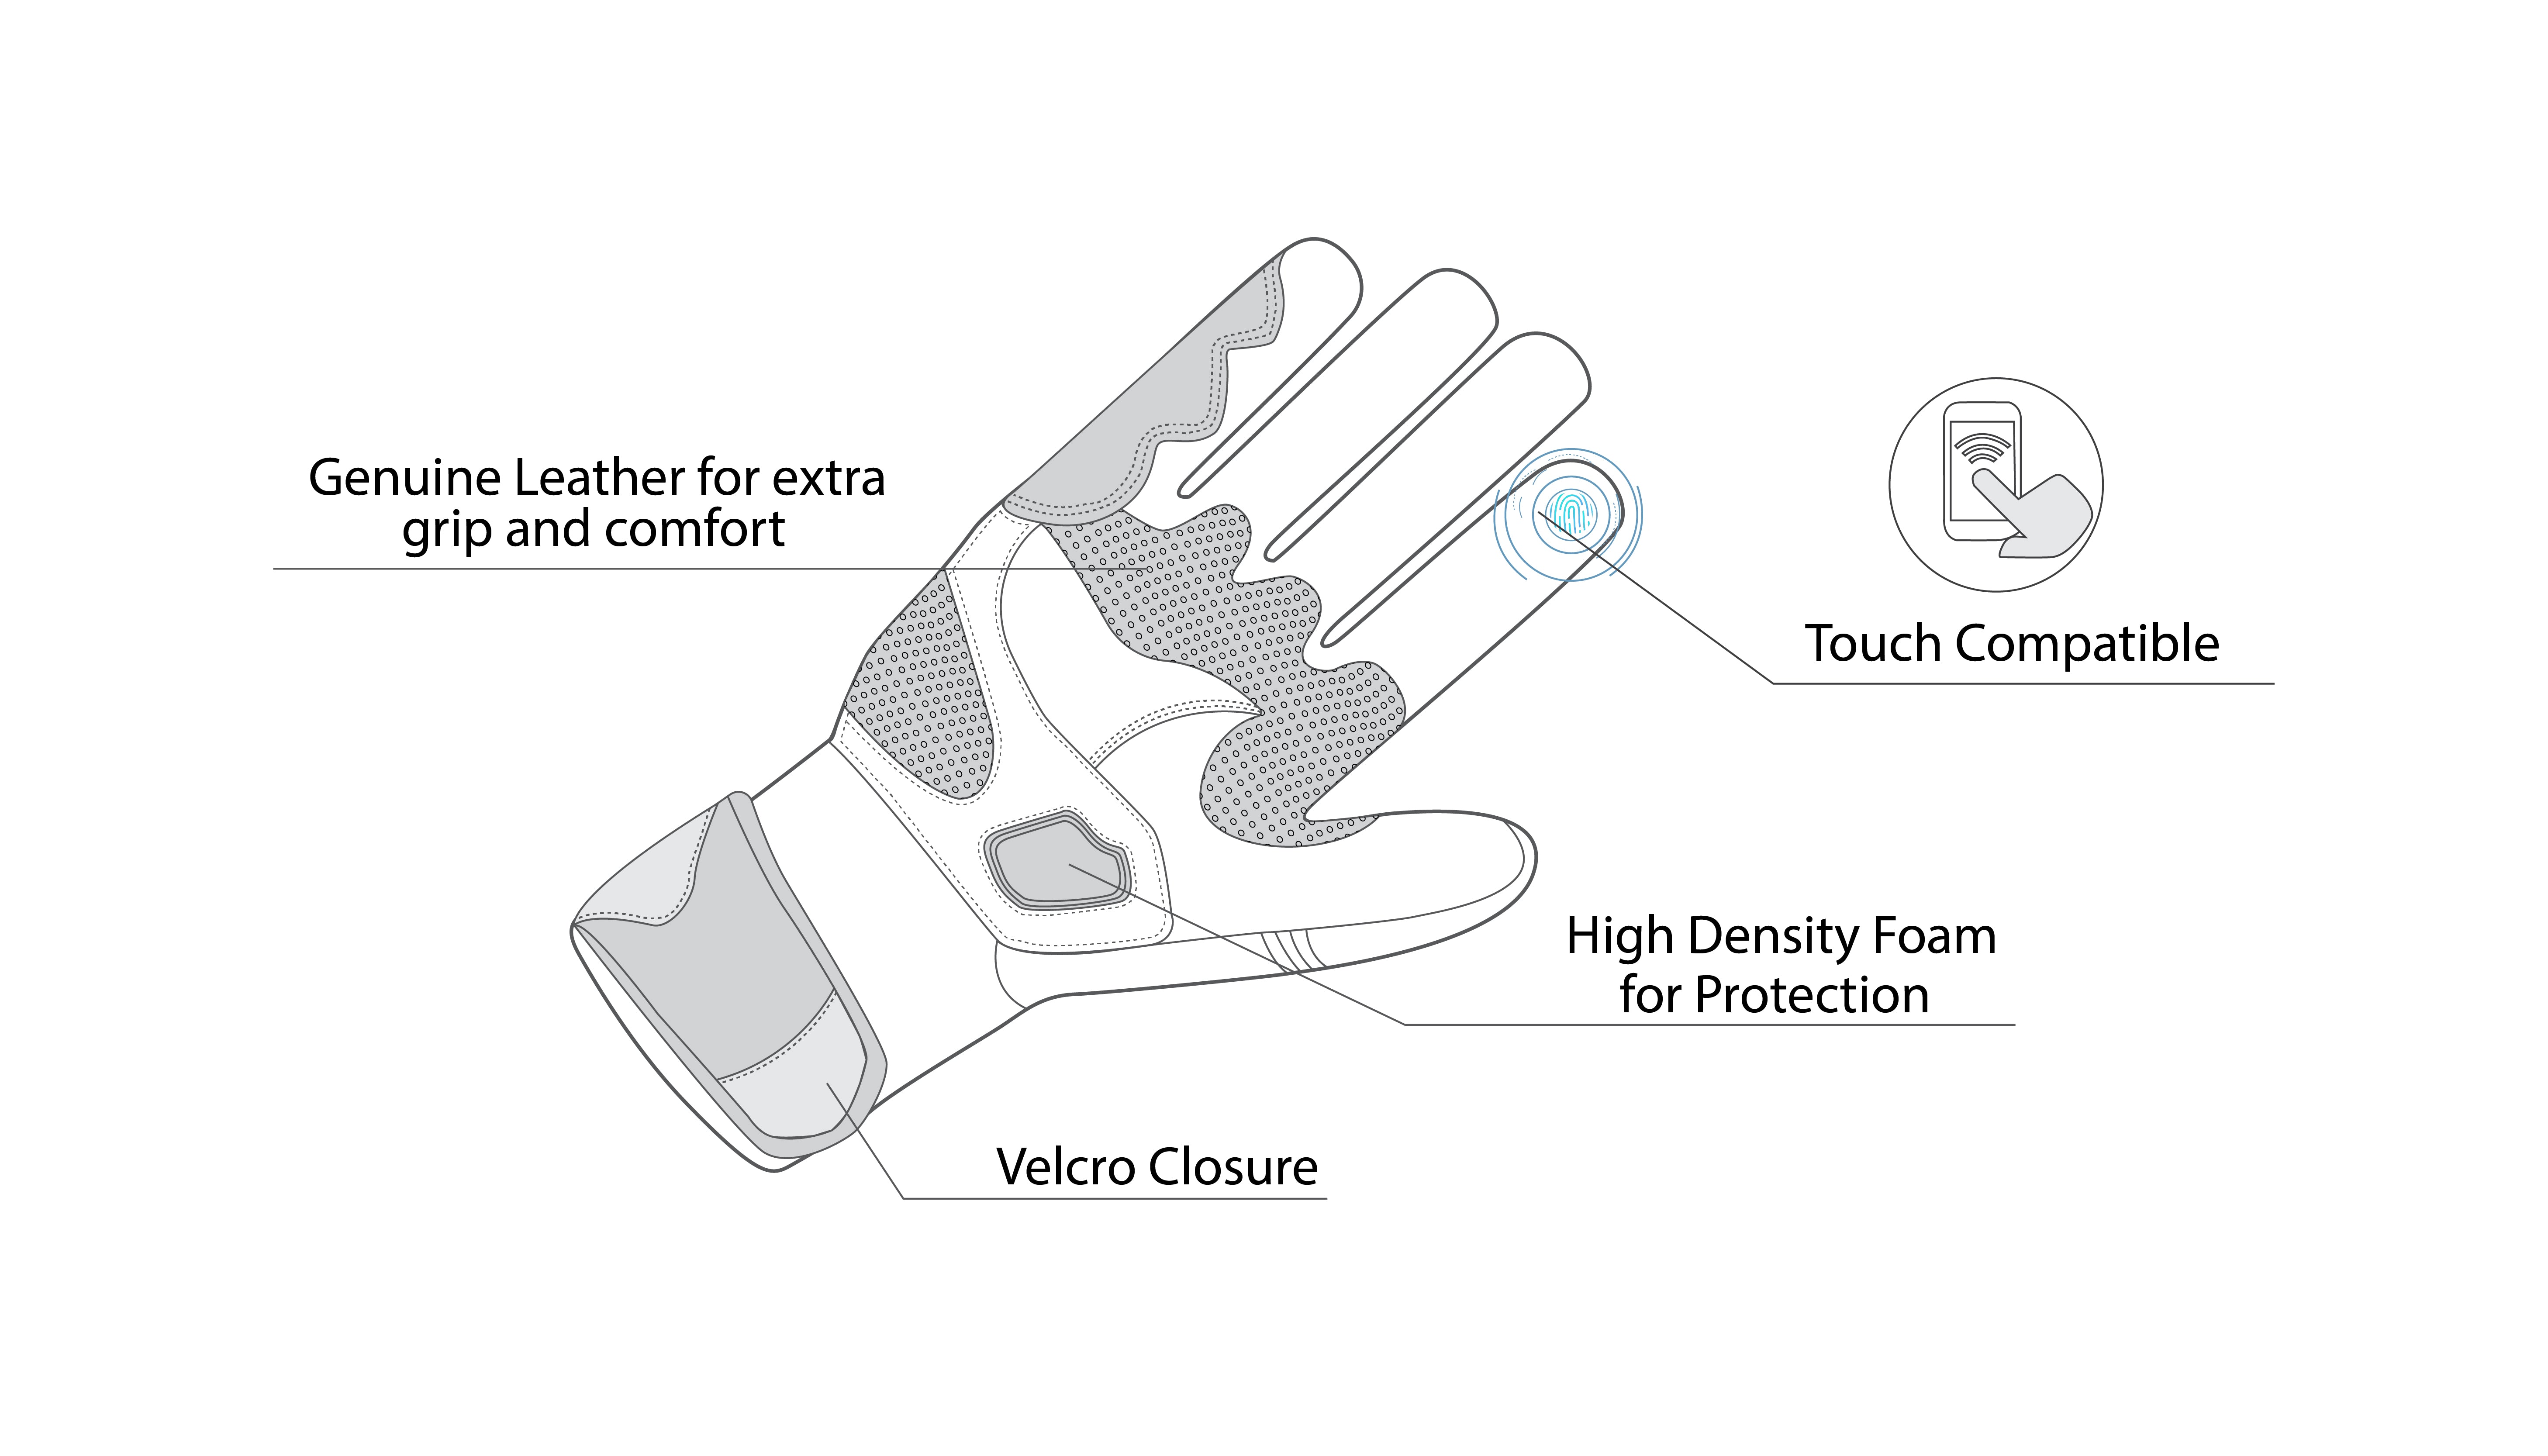 infographic sketch bela rocket long black, white and blue gloves front side view